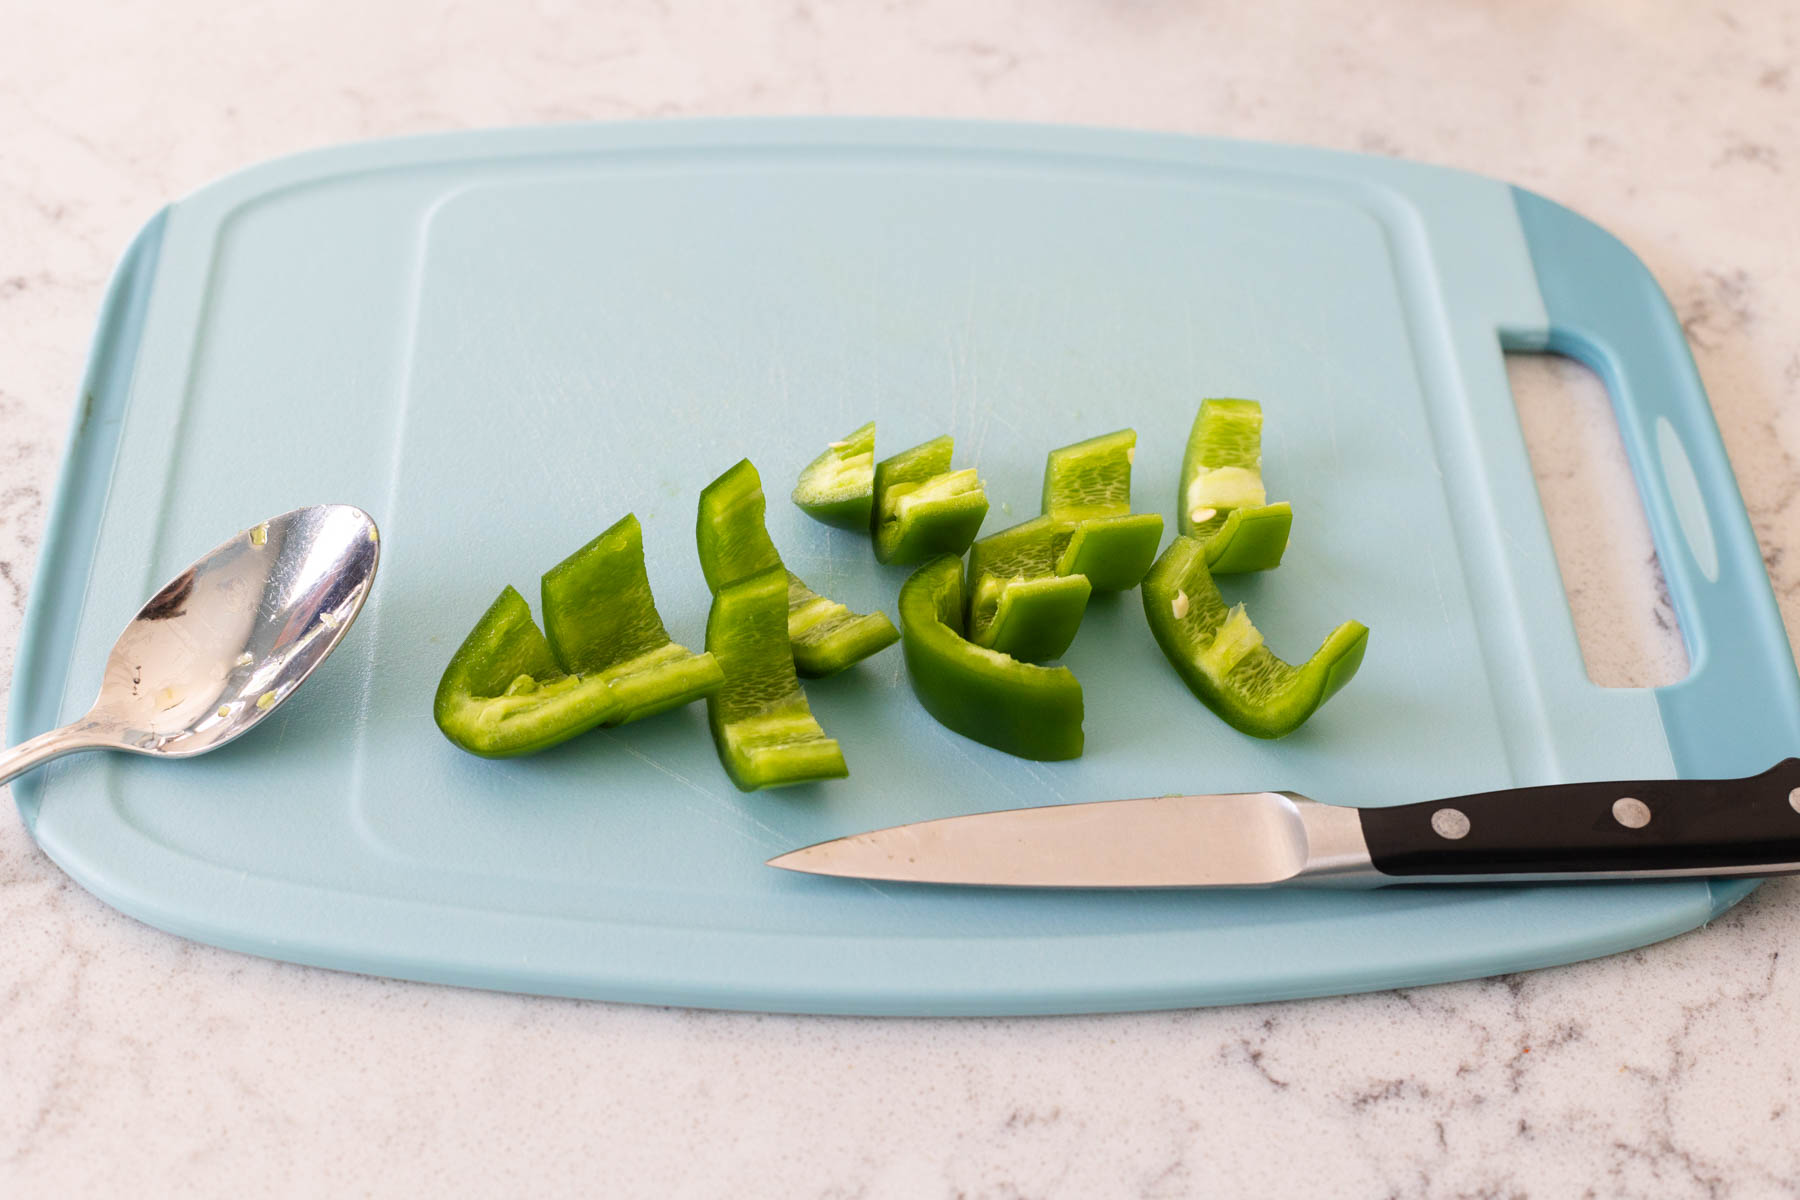 The Jalapeño pepper is on a cutting board.